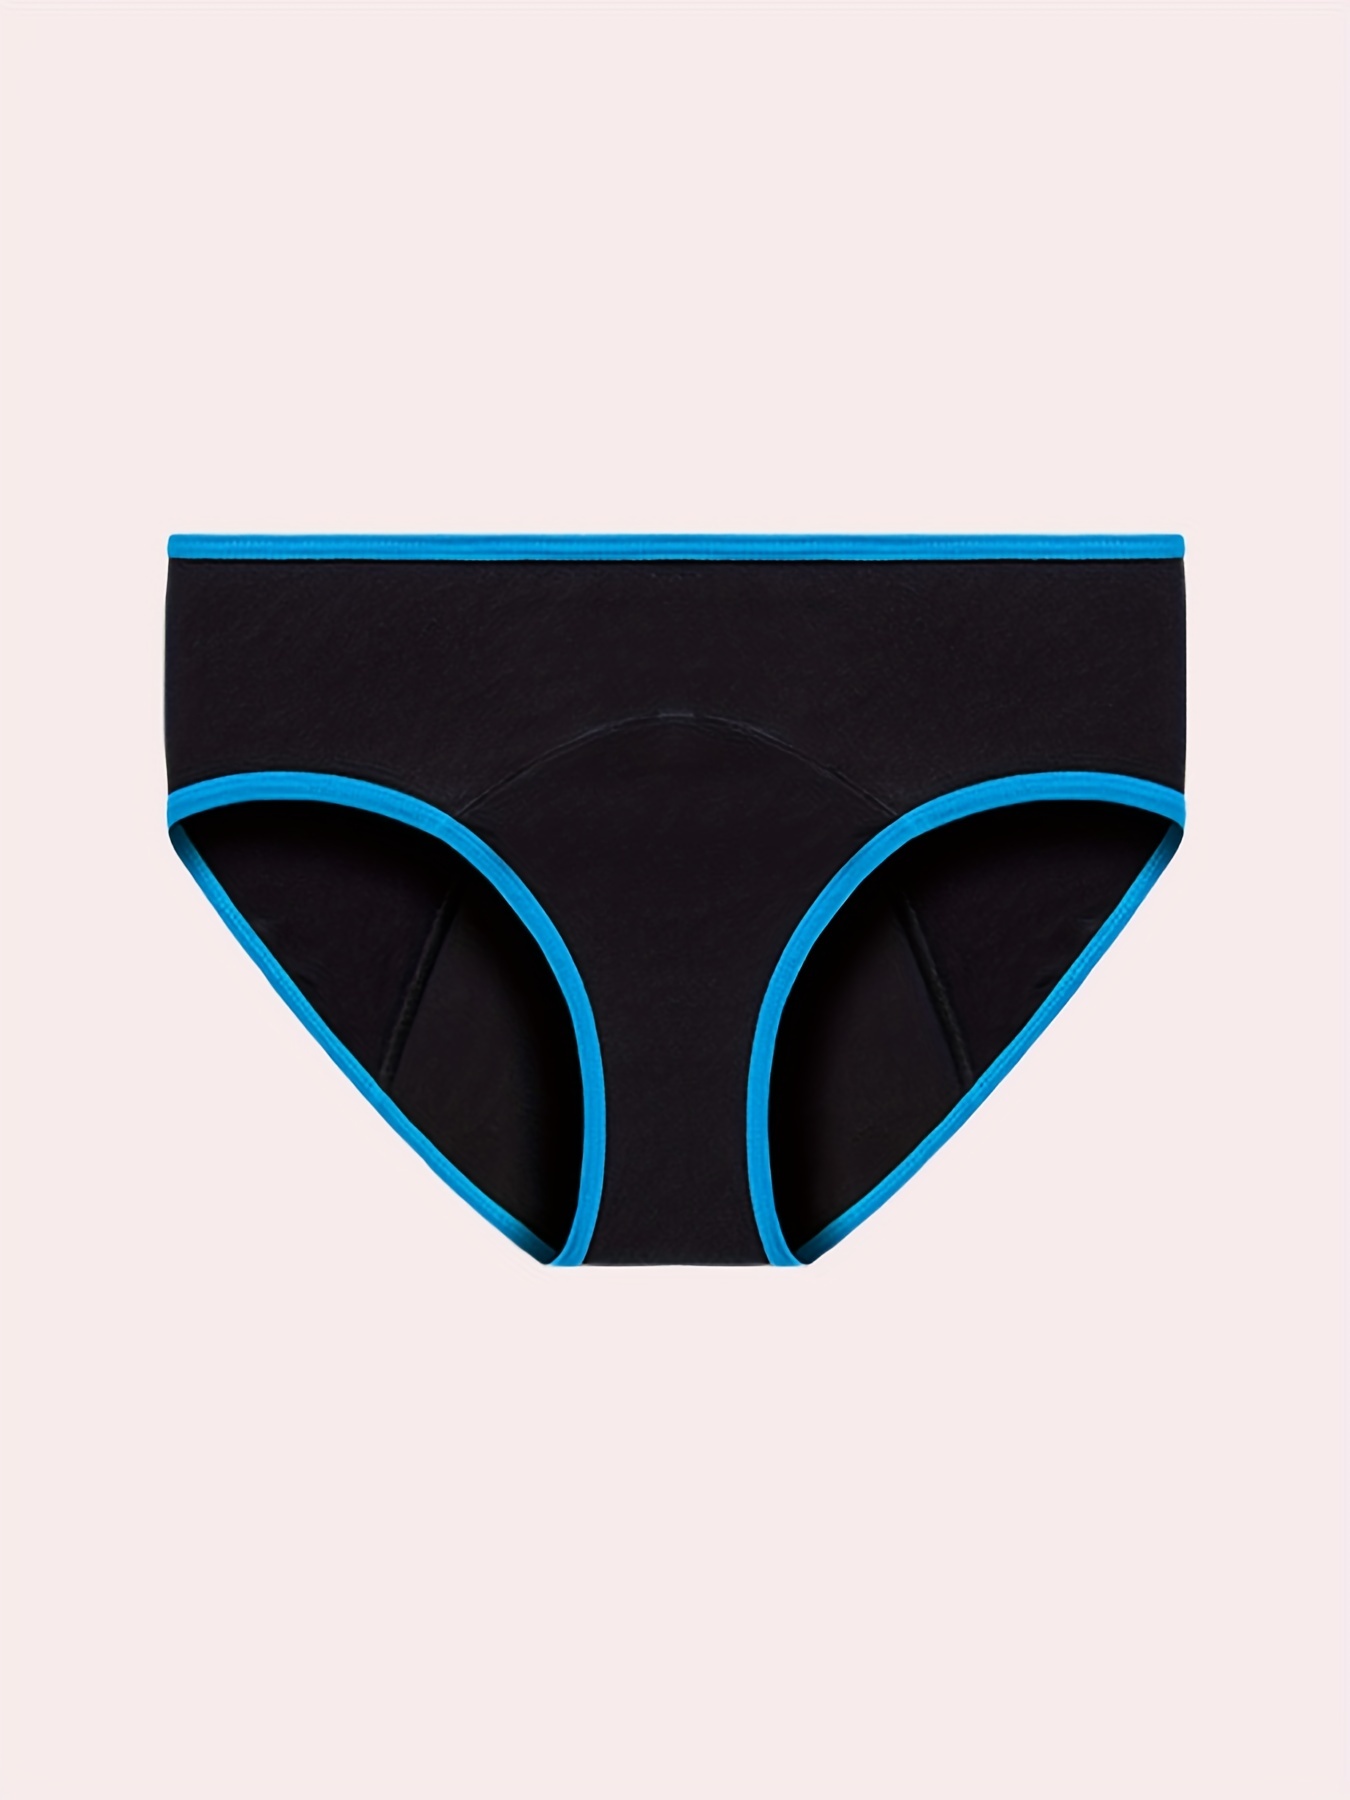 1pc Period Panties  Washable & Reusable Menstrual Small, Medium, Large,  Plus Size Underwear On Sale! – Moon Time Store